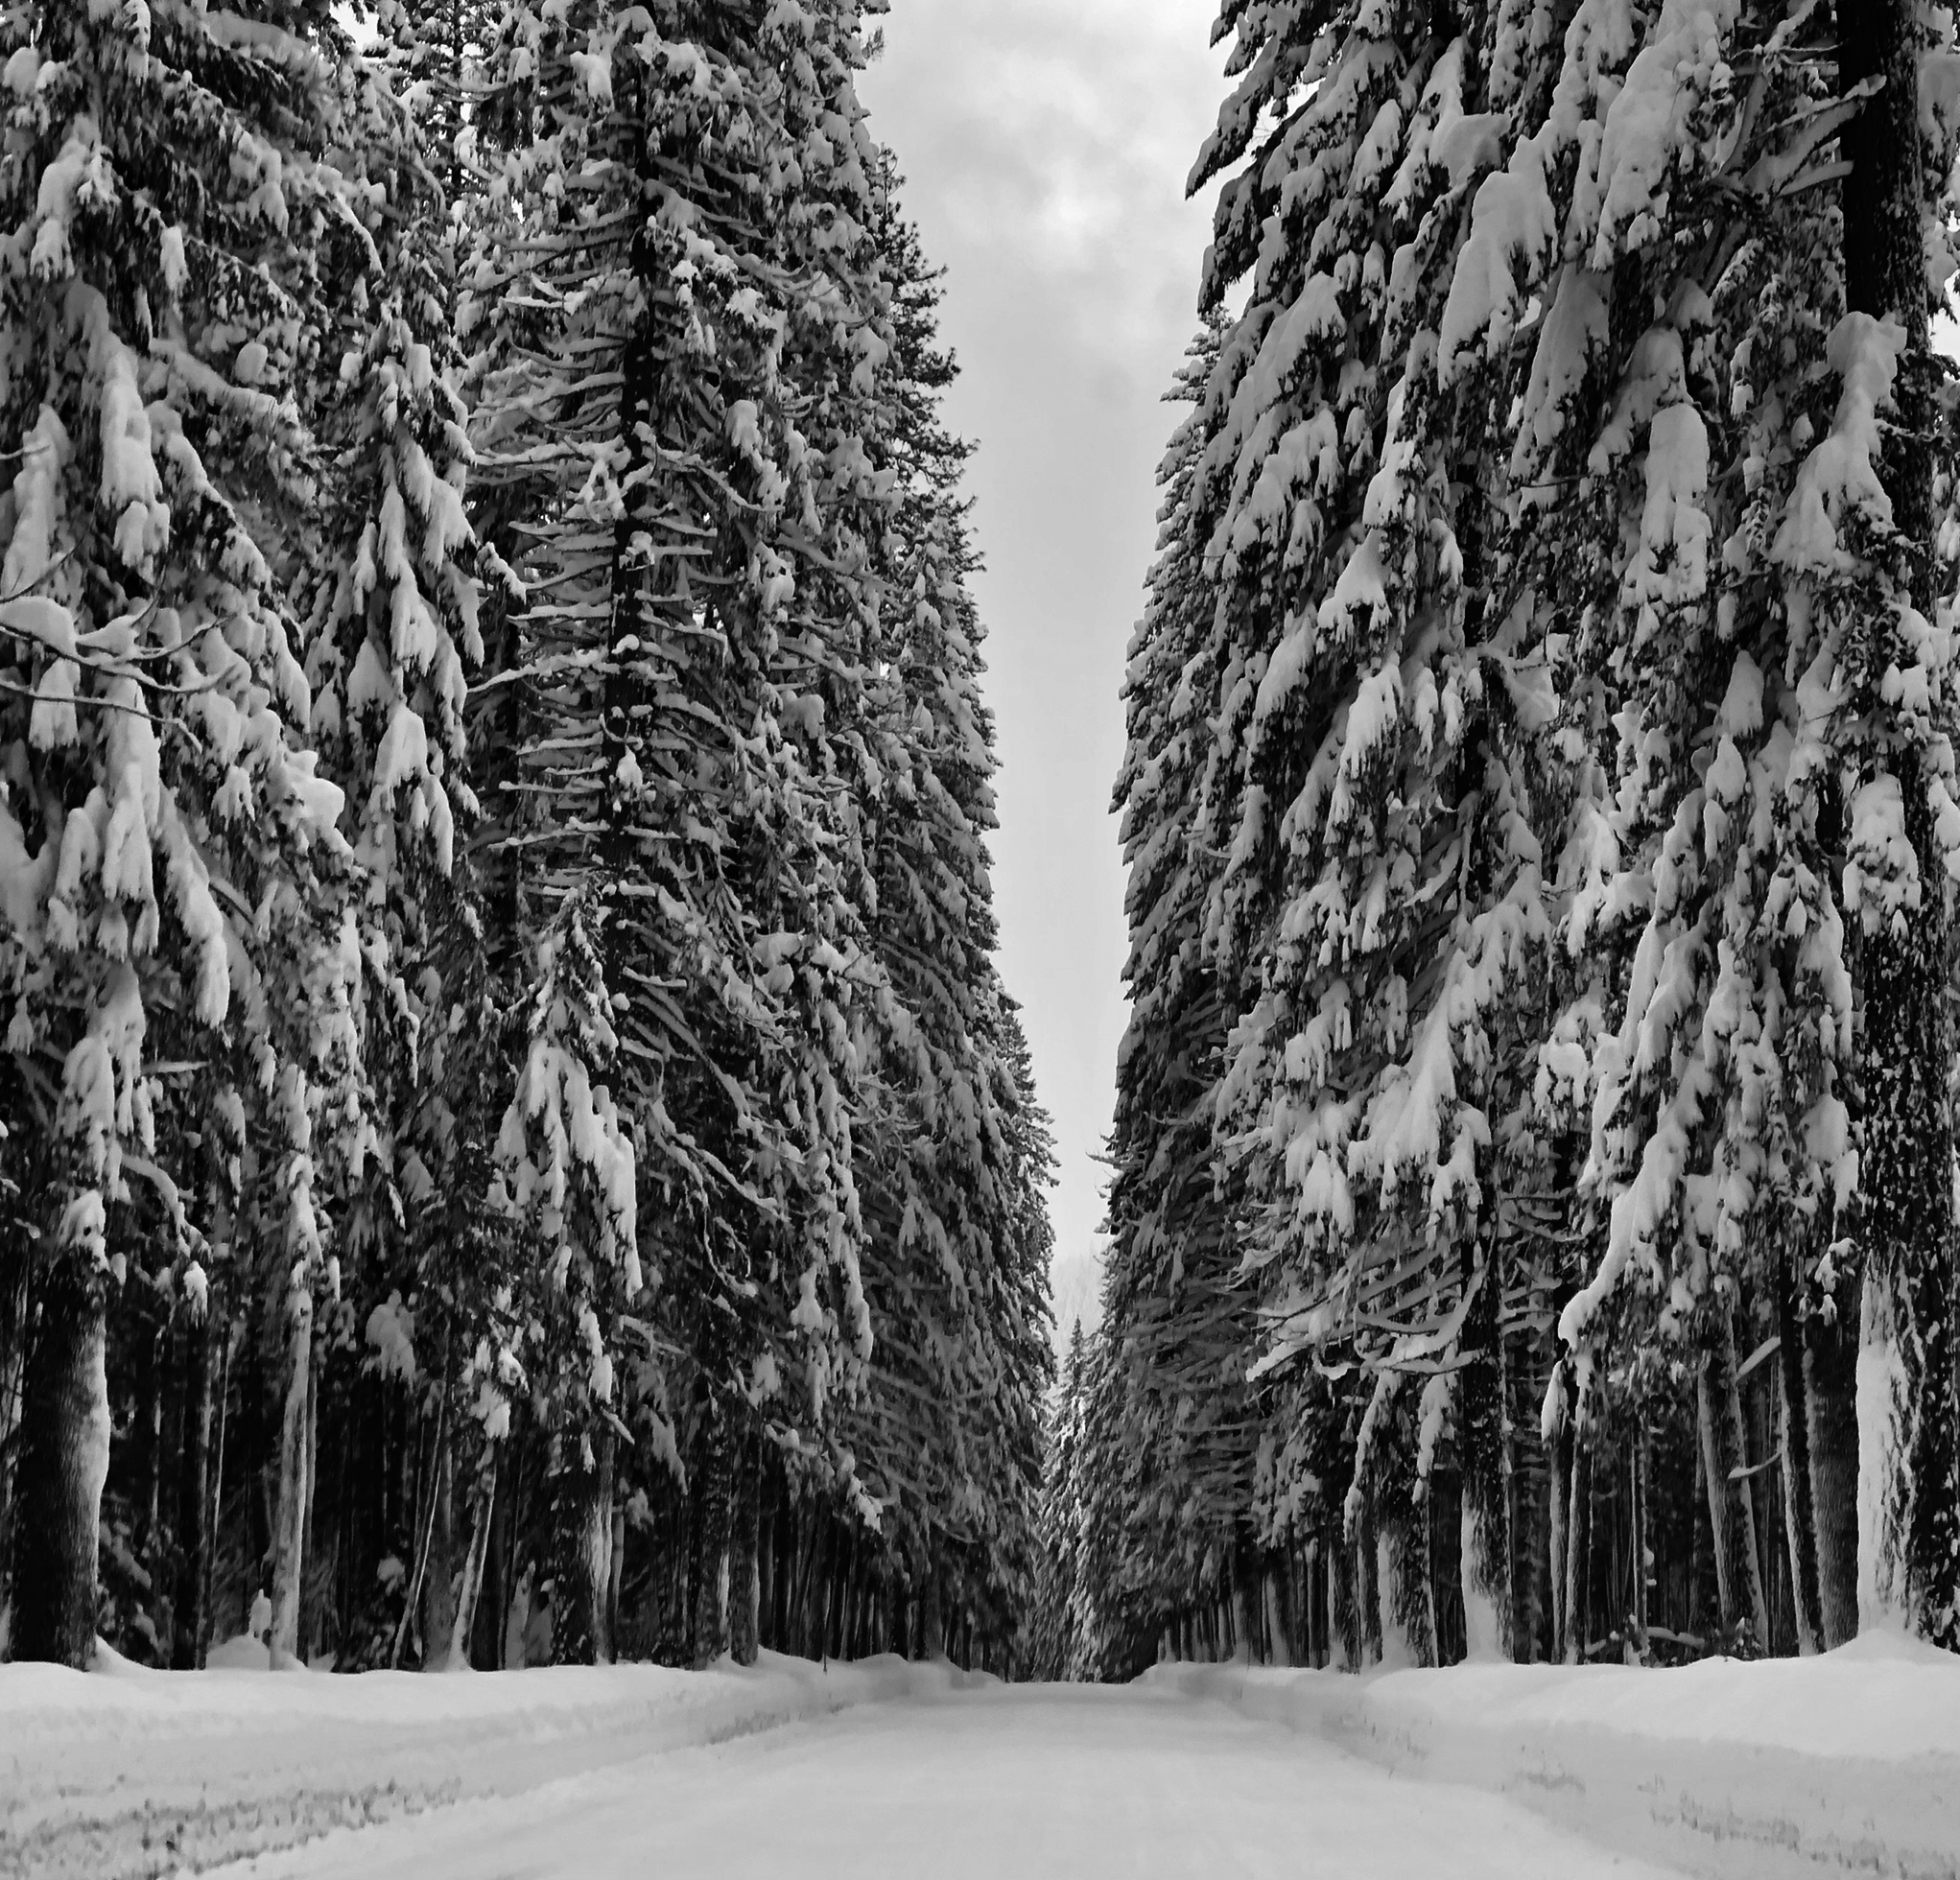 Snow-covered road shot into the horizon bordered by two magnificent stands of towering, full, snow-draped trees along the entire span. The road has been plowed, so there is a high border of snow on either side running the full length into the distance.